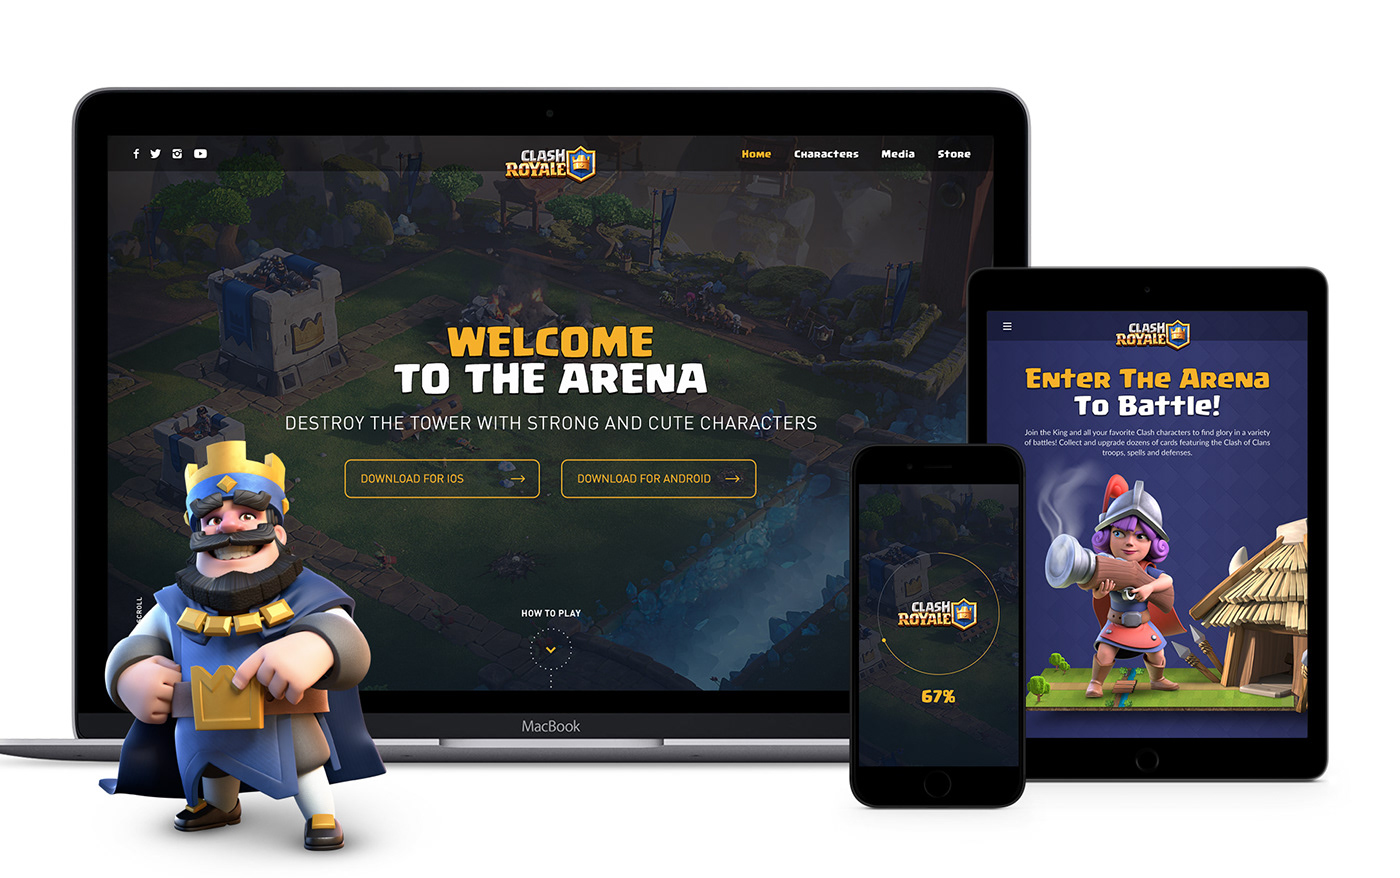 supercell Website game Character Clash Royale